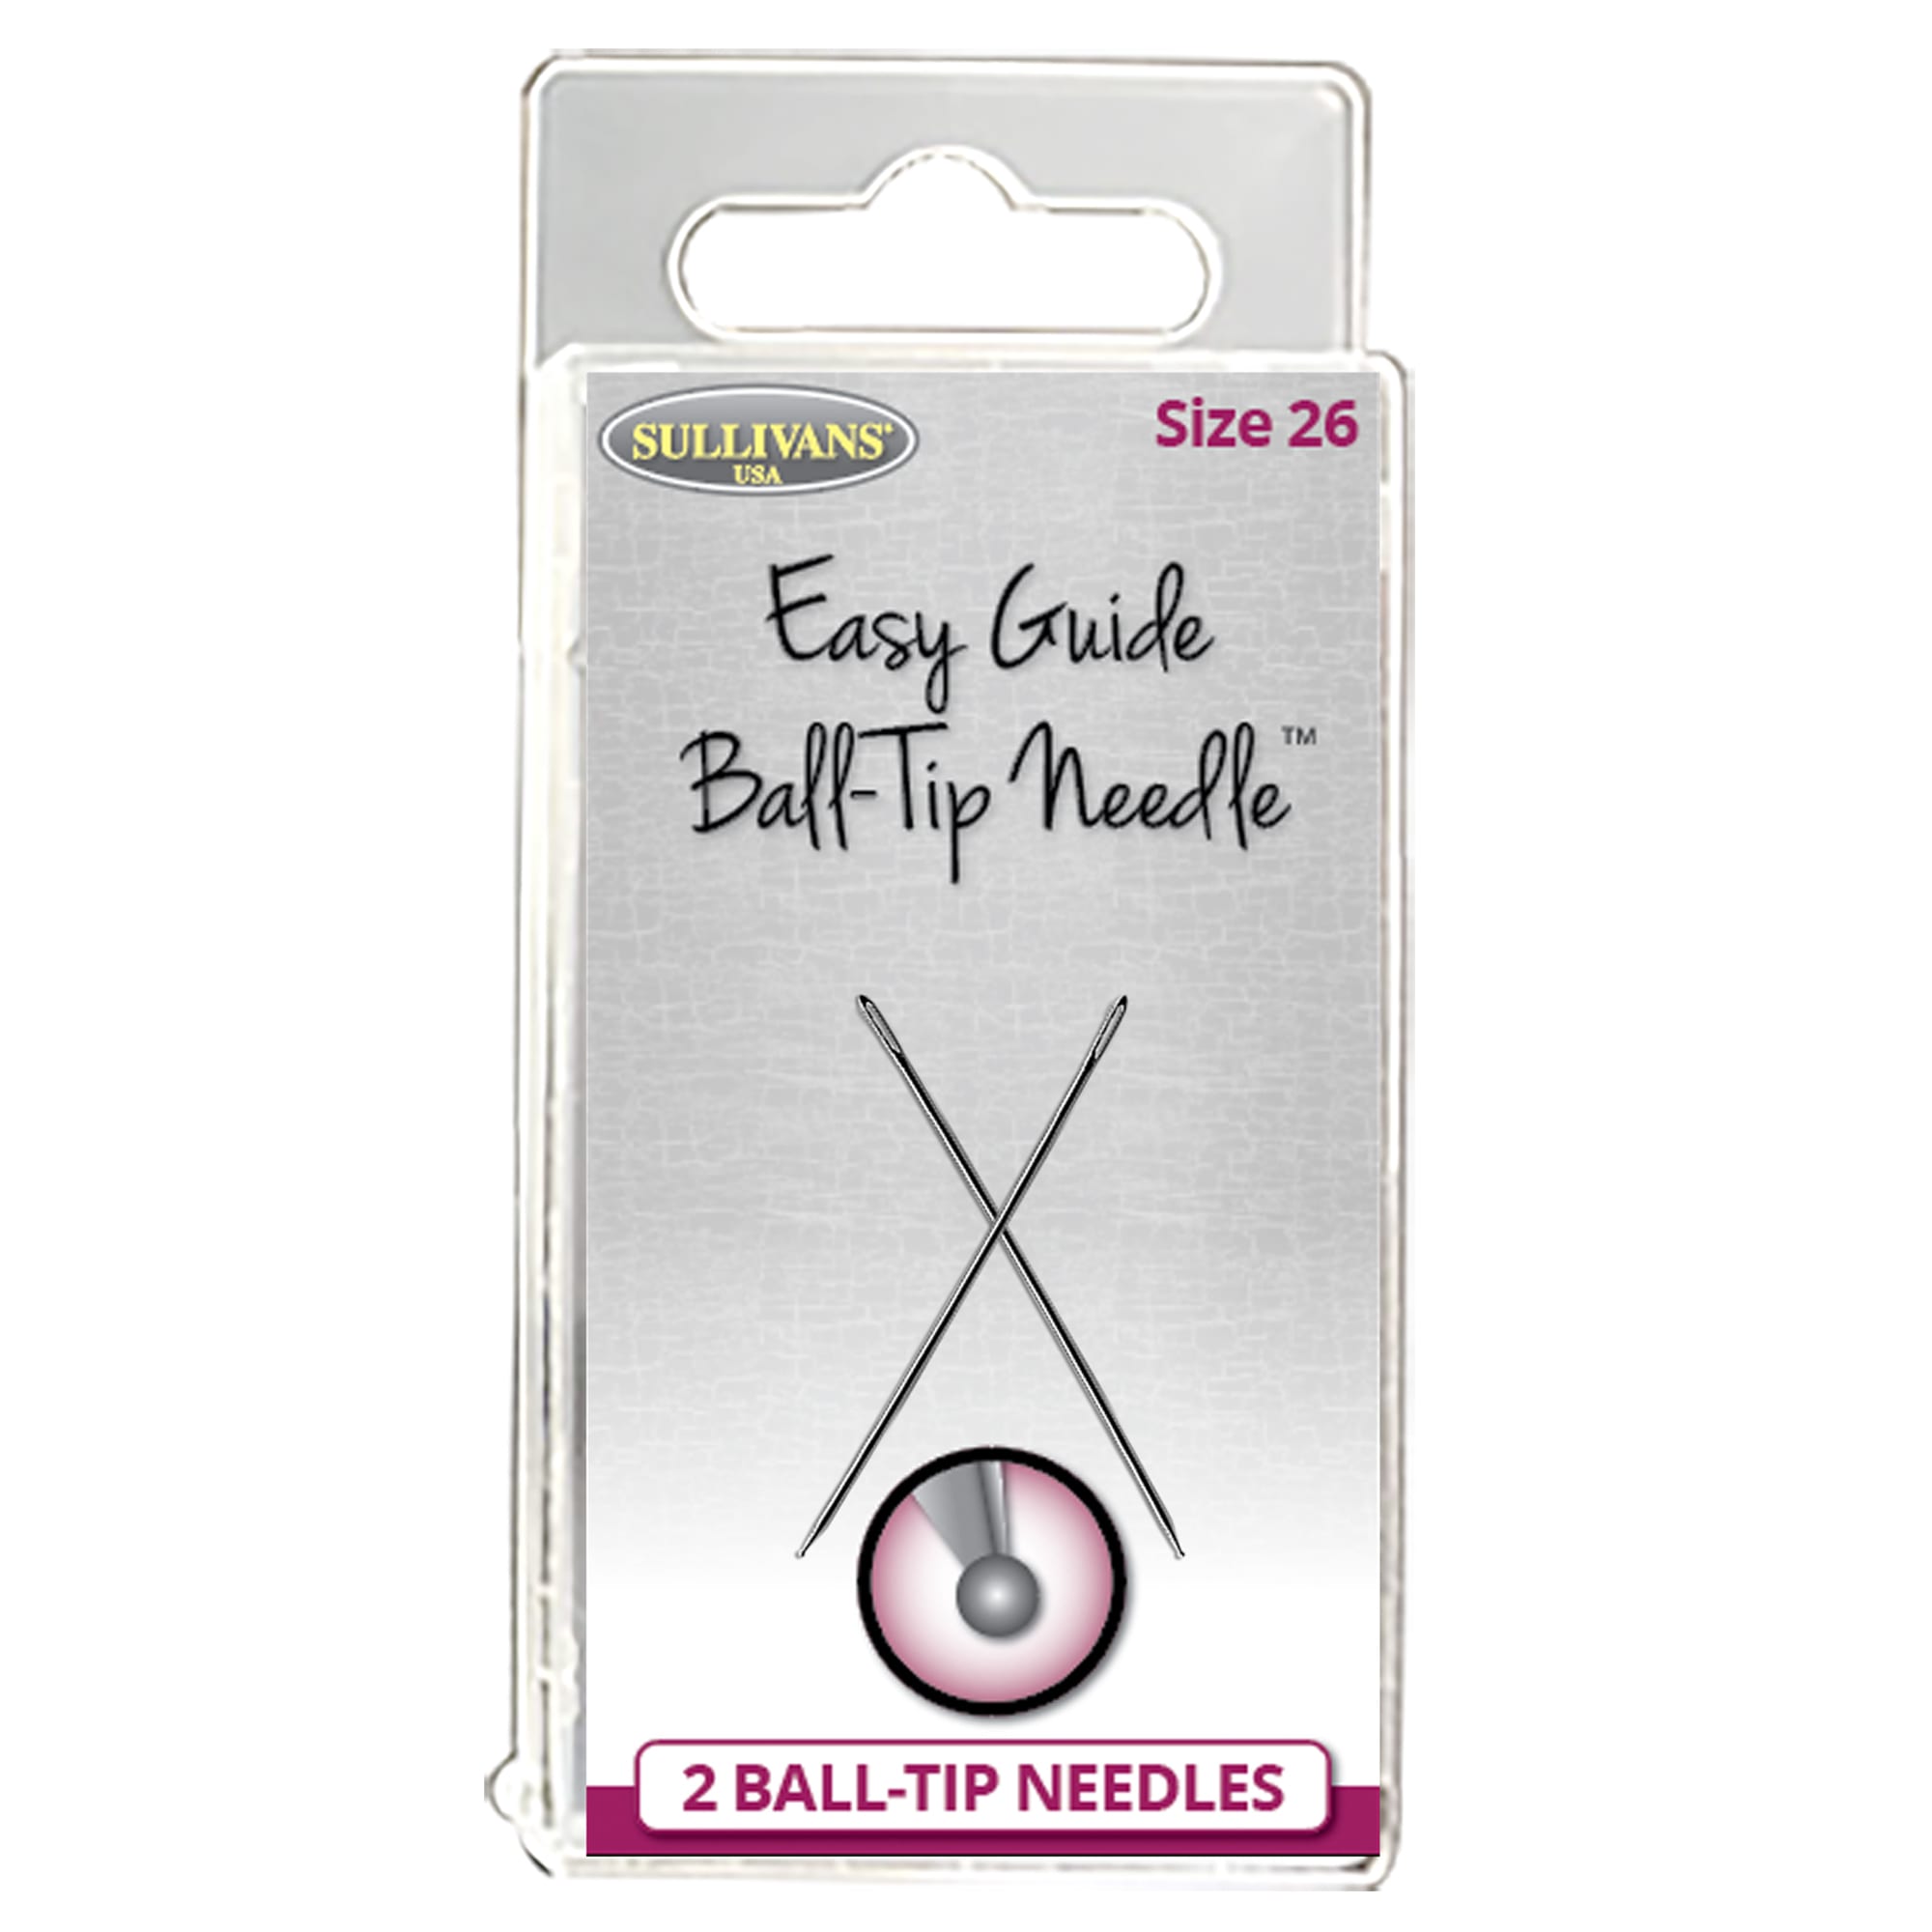 Easy Guide Ball-Tip Needle - Size 26